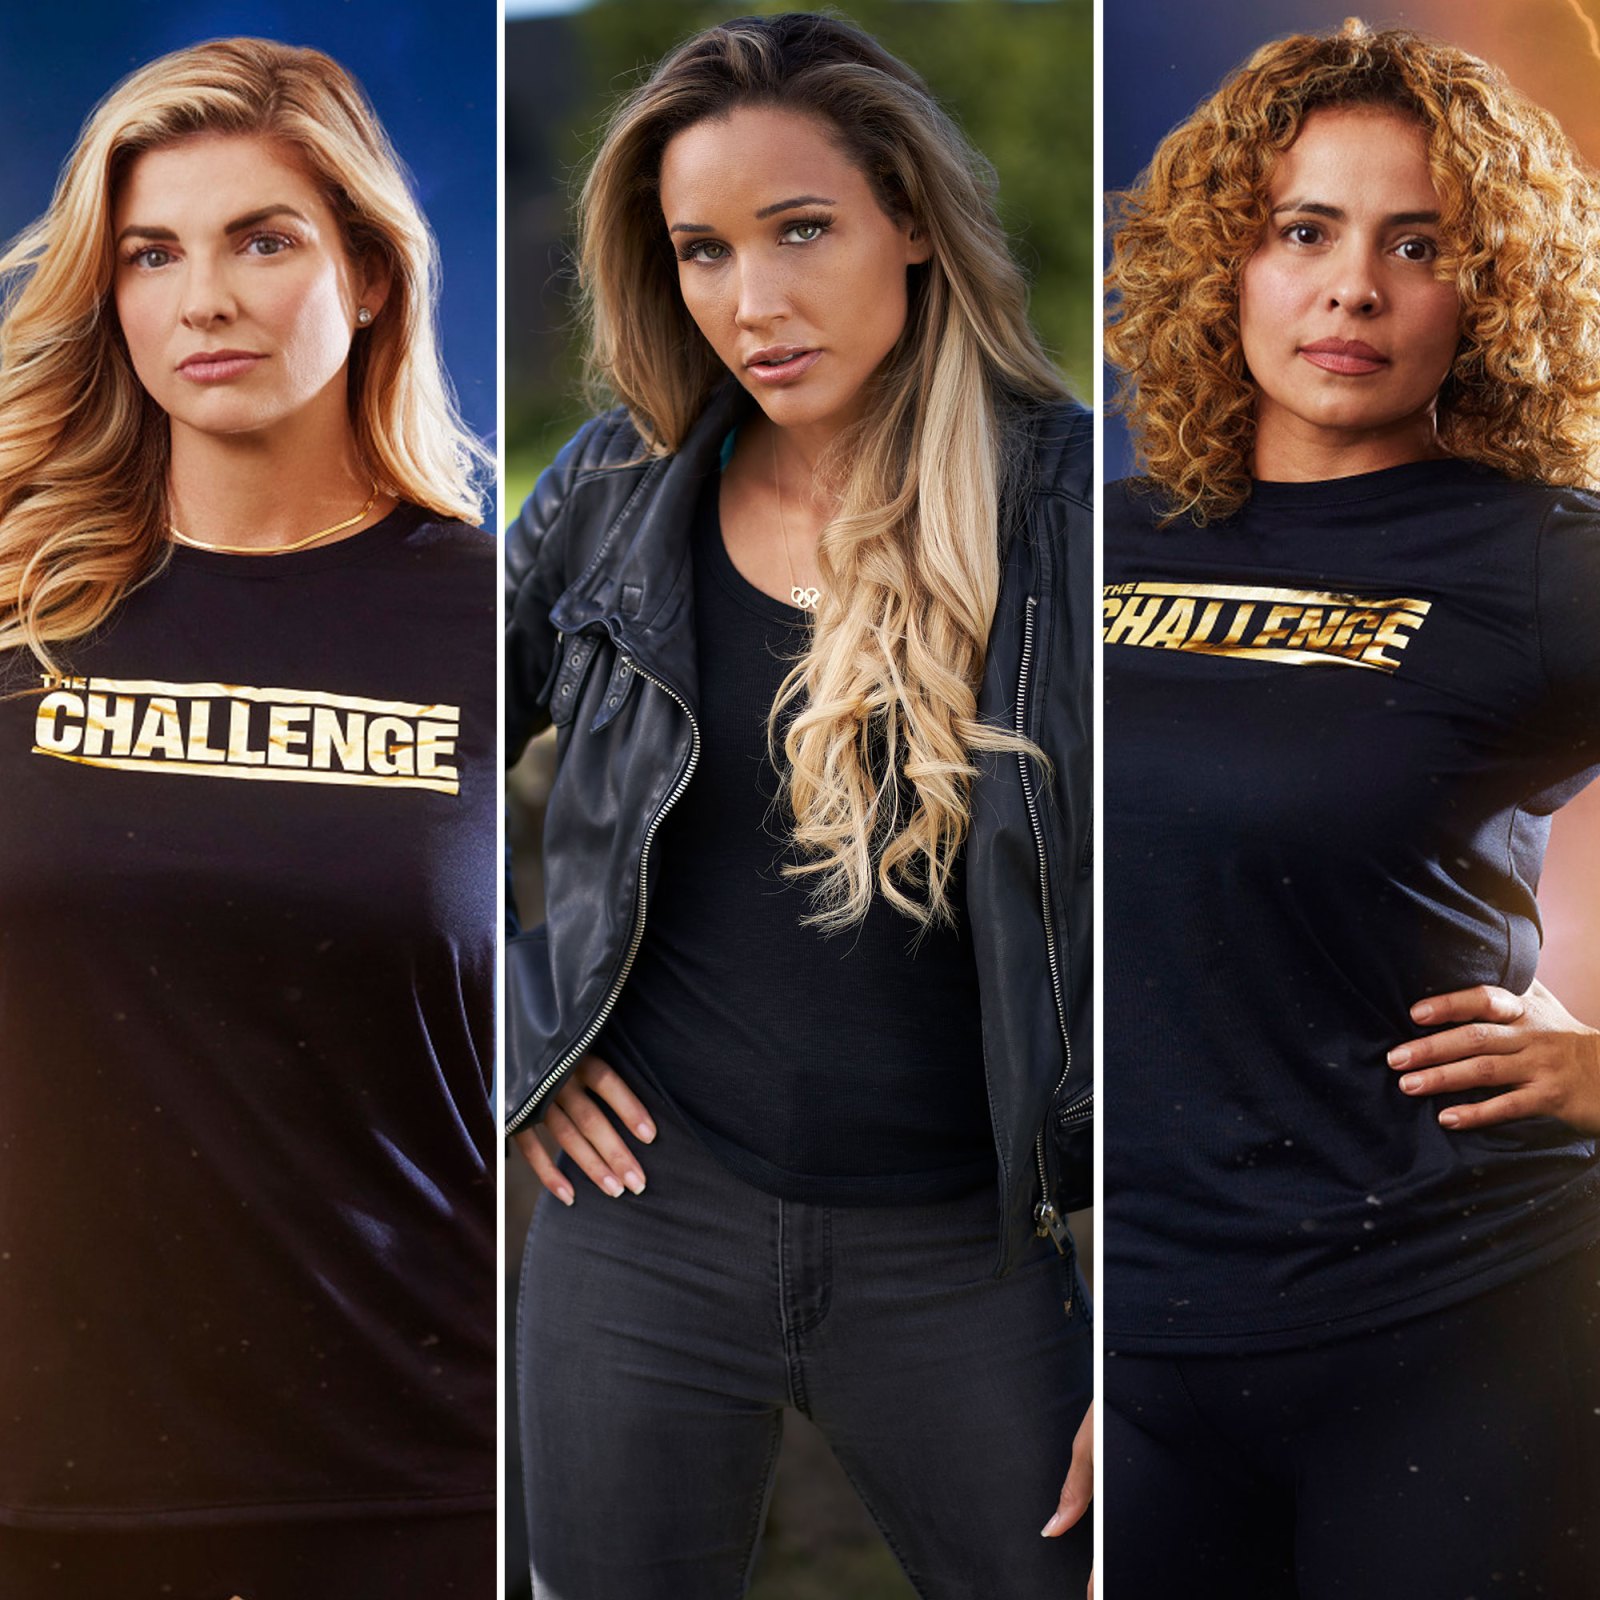 The Challenge Cast Calls Out Lolo Jones For Bashing The Show